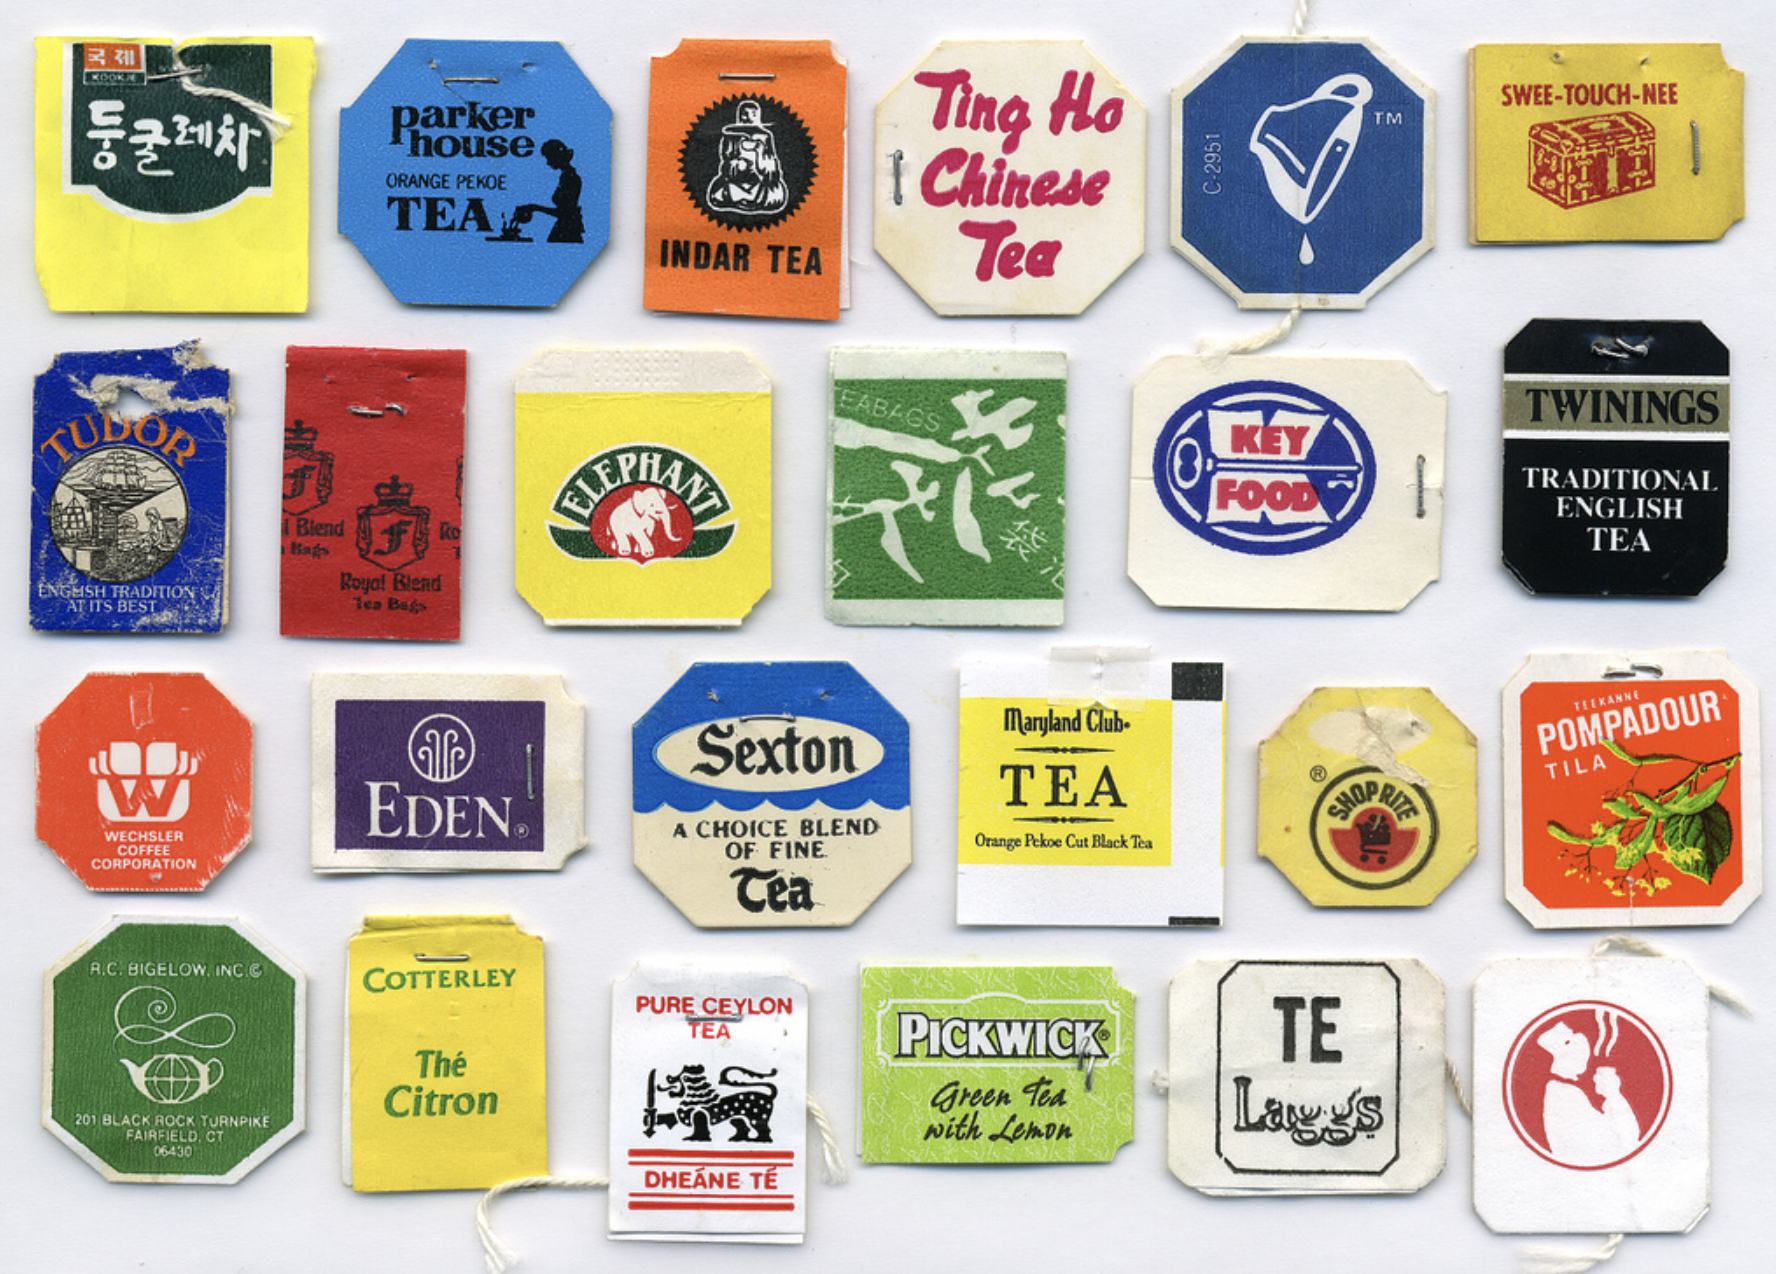 rare finds of archive tea packaging